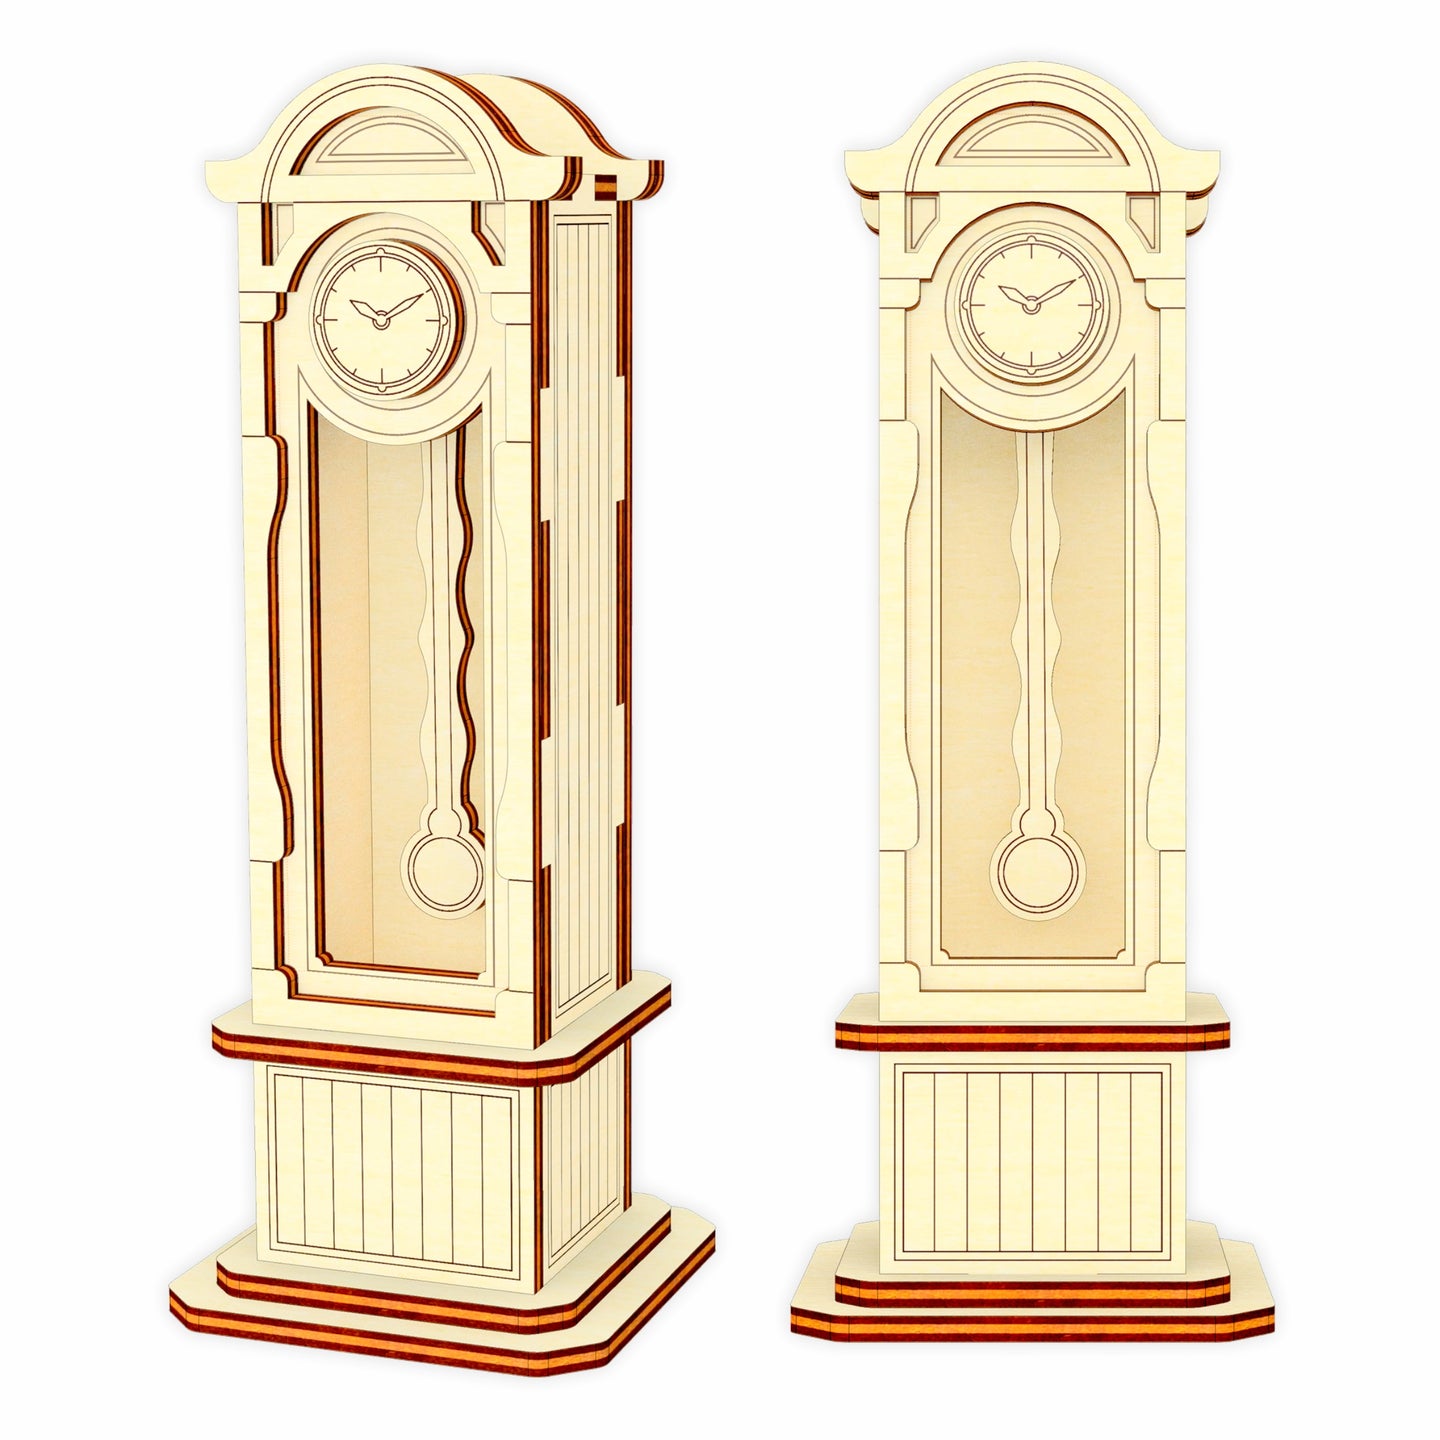 This is a laser cut design of a Pendulum Clock miniature with intricate details. The clock cabinet is made from plywood and features a moving pendulum.